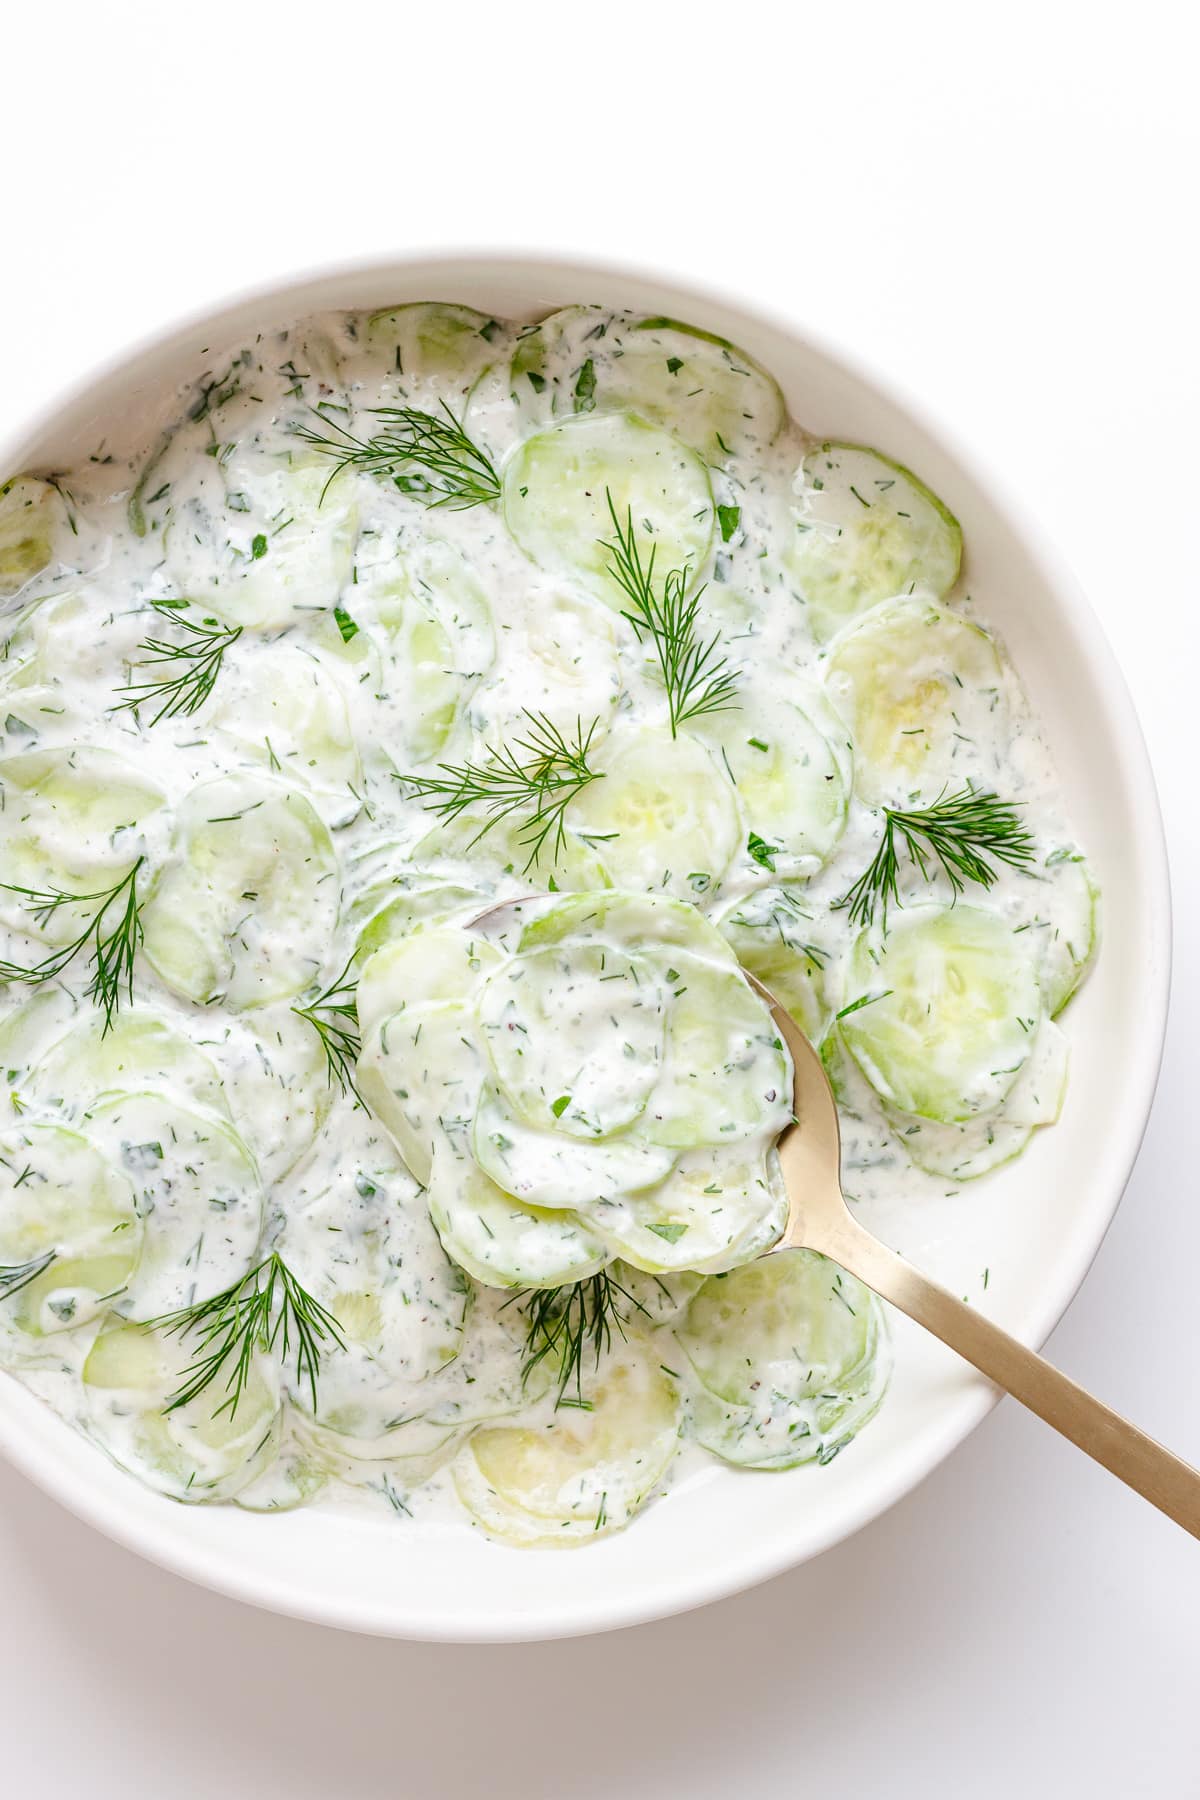 Gurkensalat (creamy German cucumber salad) in a white bowl with gold salad server lifting some out.